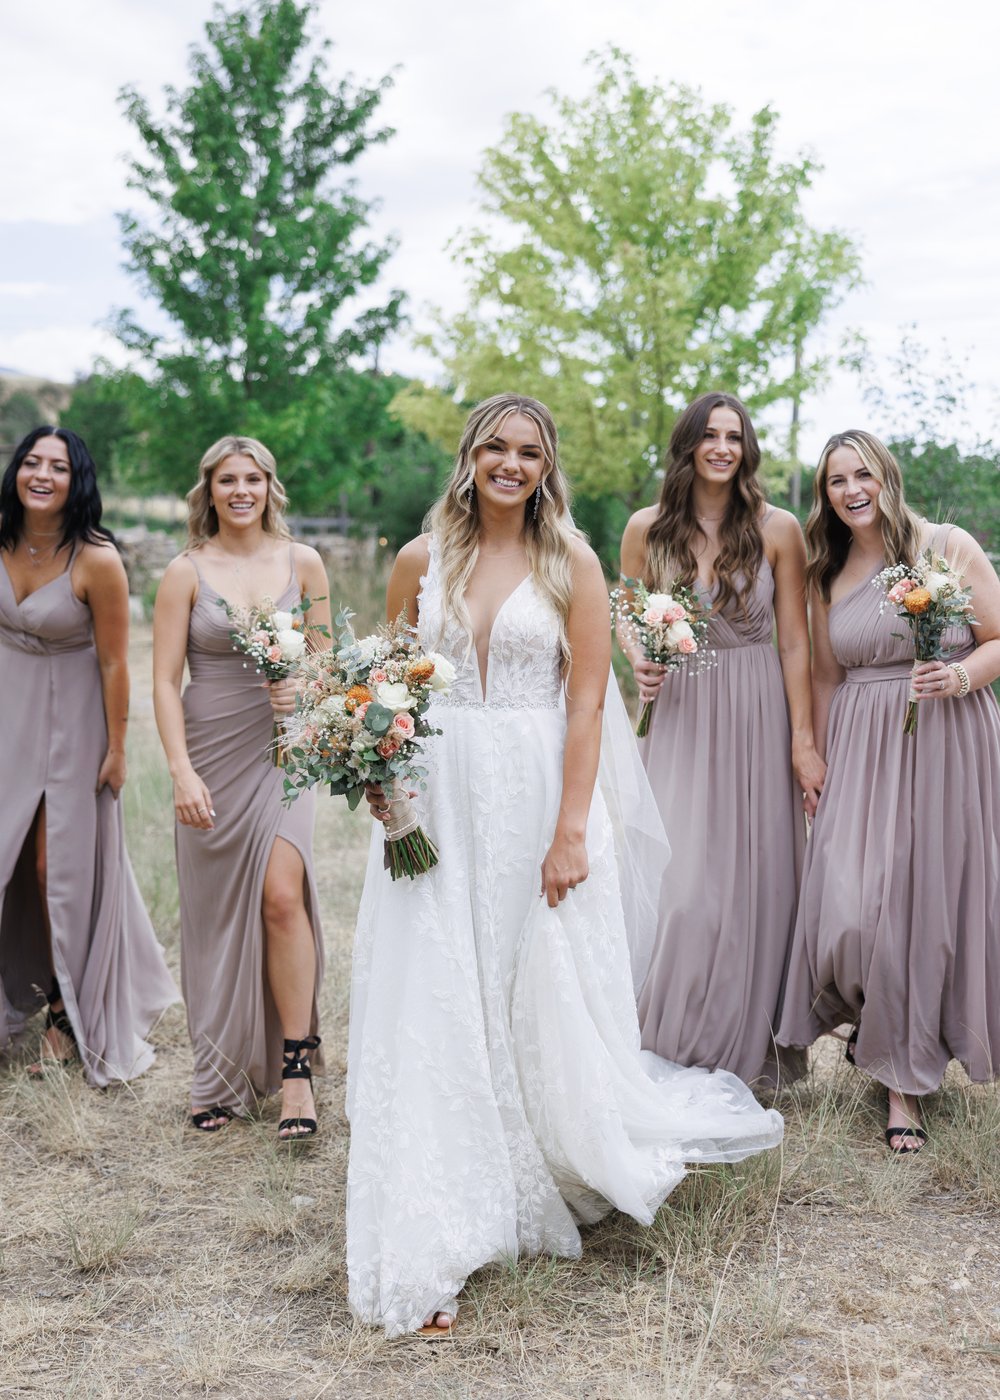  A bride with her bridesmaids wearing muted purple flowy gowns was captured by Savanna Richardson Photography in northern Utah. Northern Utah #SavannaRichardsonPhotography #SavannaRichardsonWeddings #QuietMeadowFarms #MapletonUTweddingphotographers 